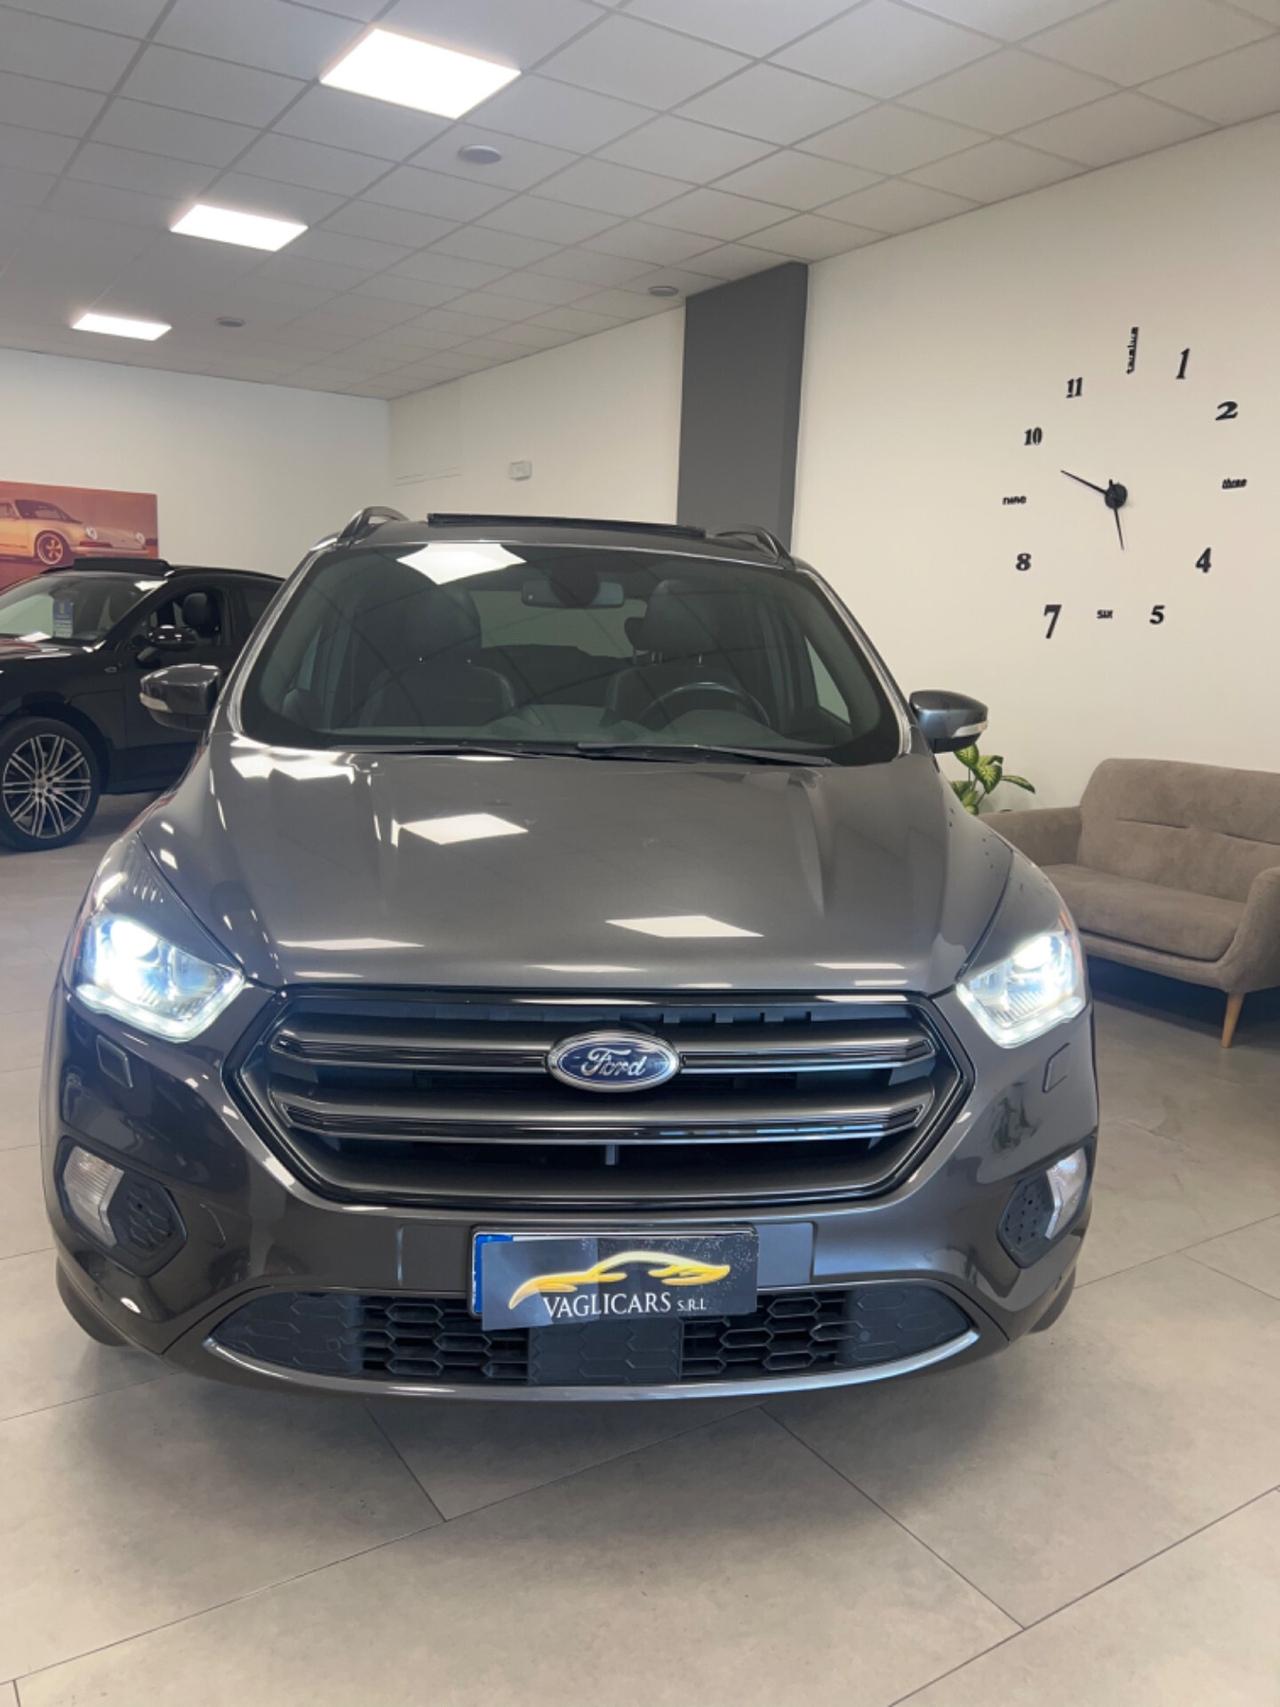 Ford Kuga 2.0 TDCI 150 CV S&S 4WD Powershift ST-Line Business